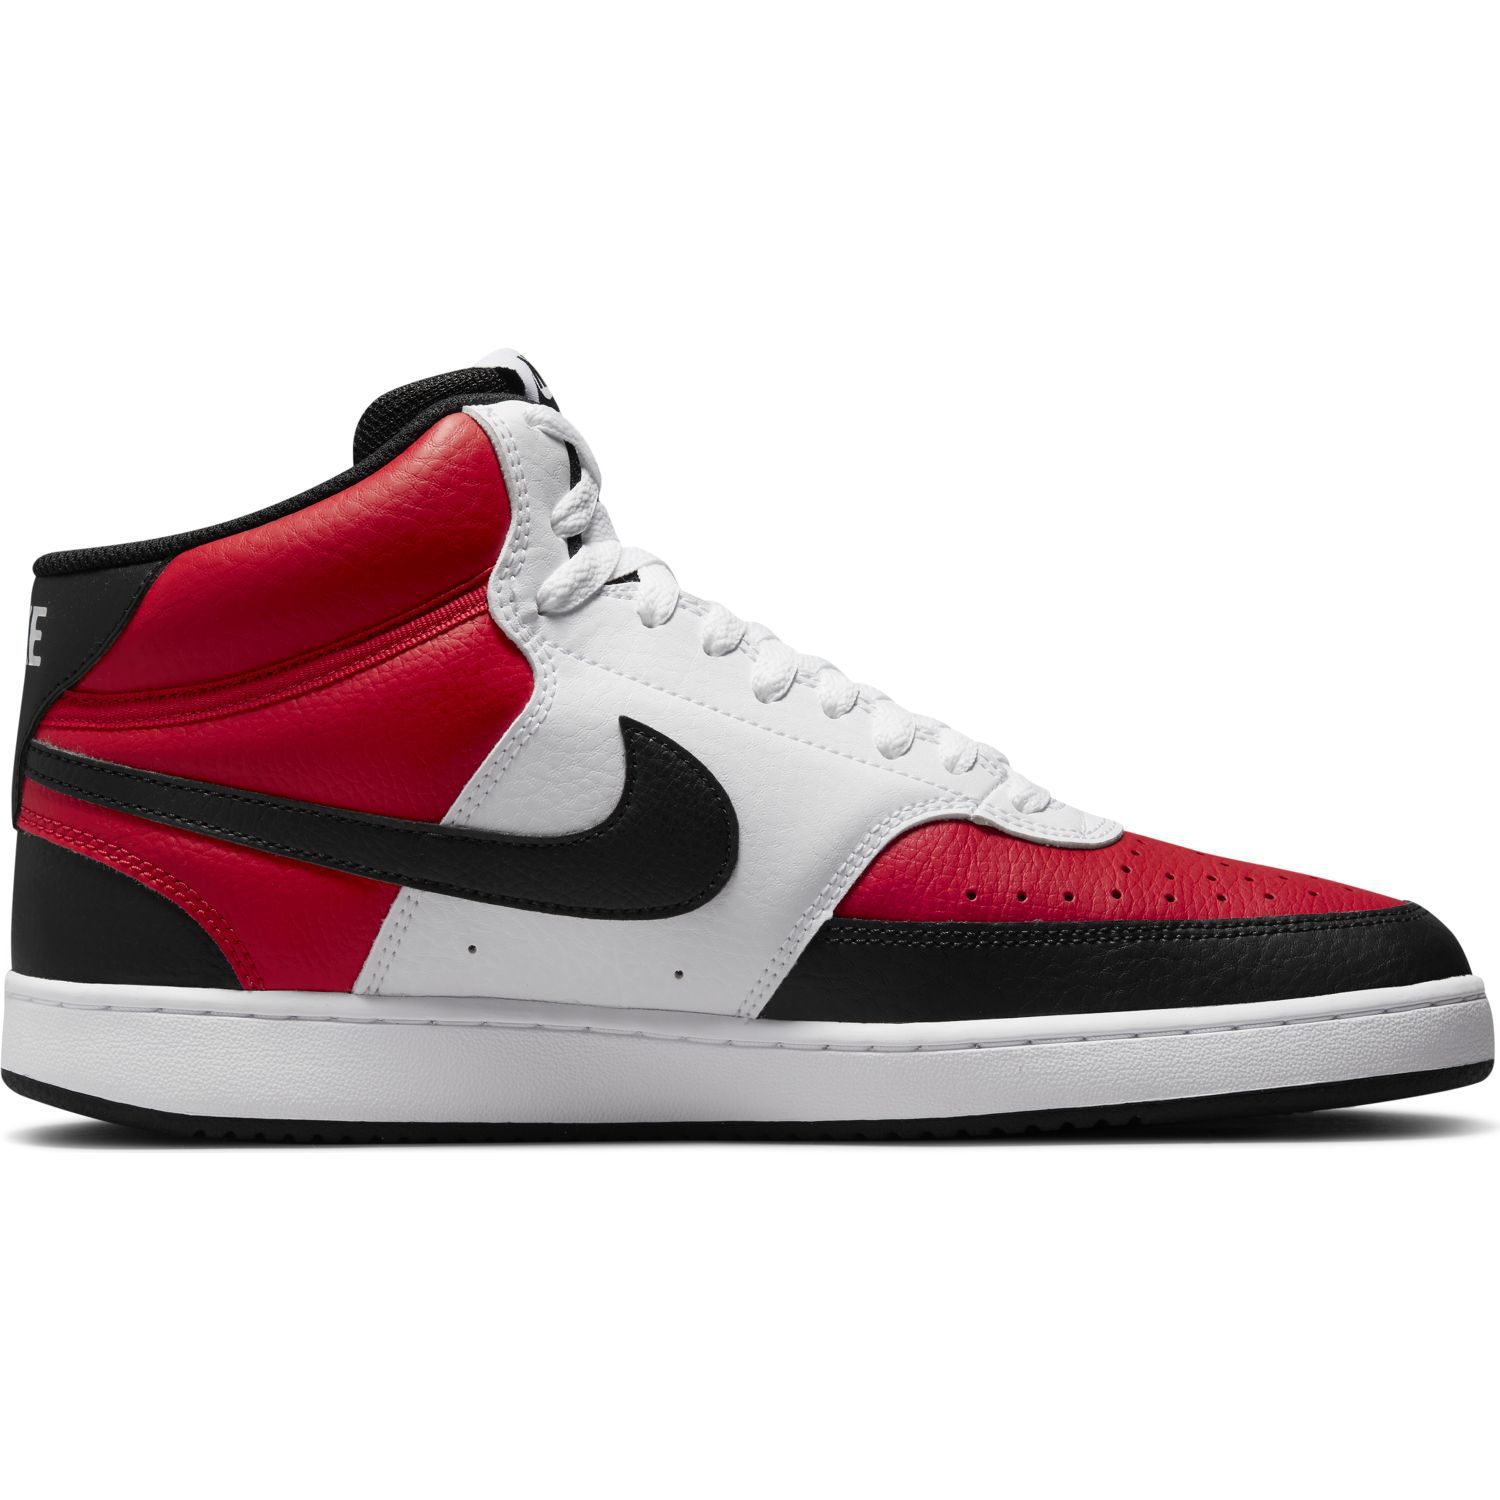 Mens Red Nike Shoes | Kohl's